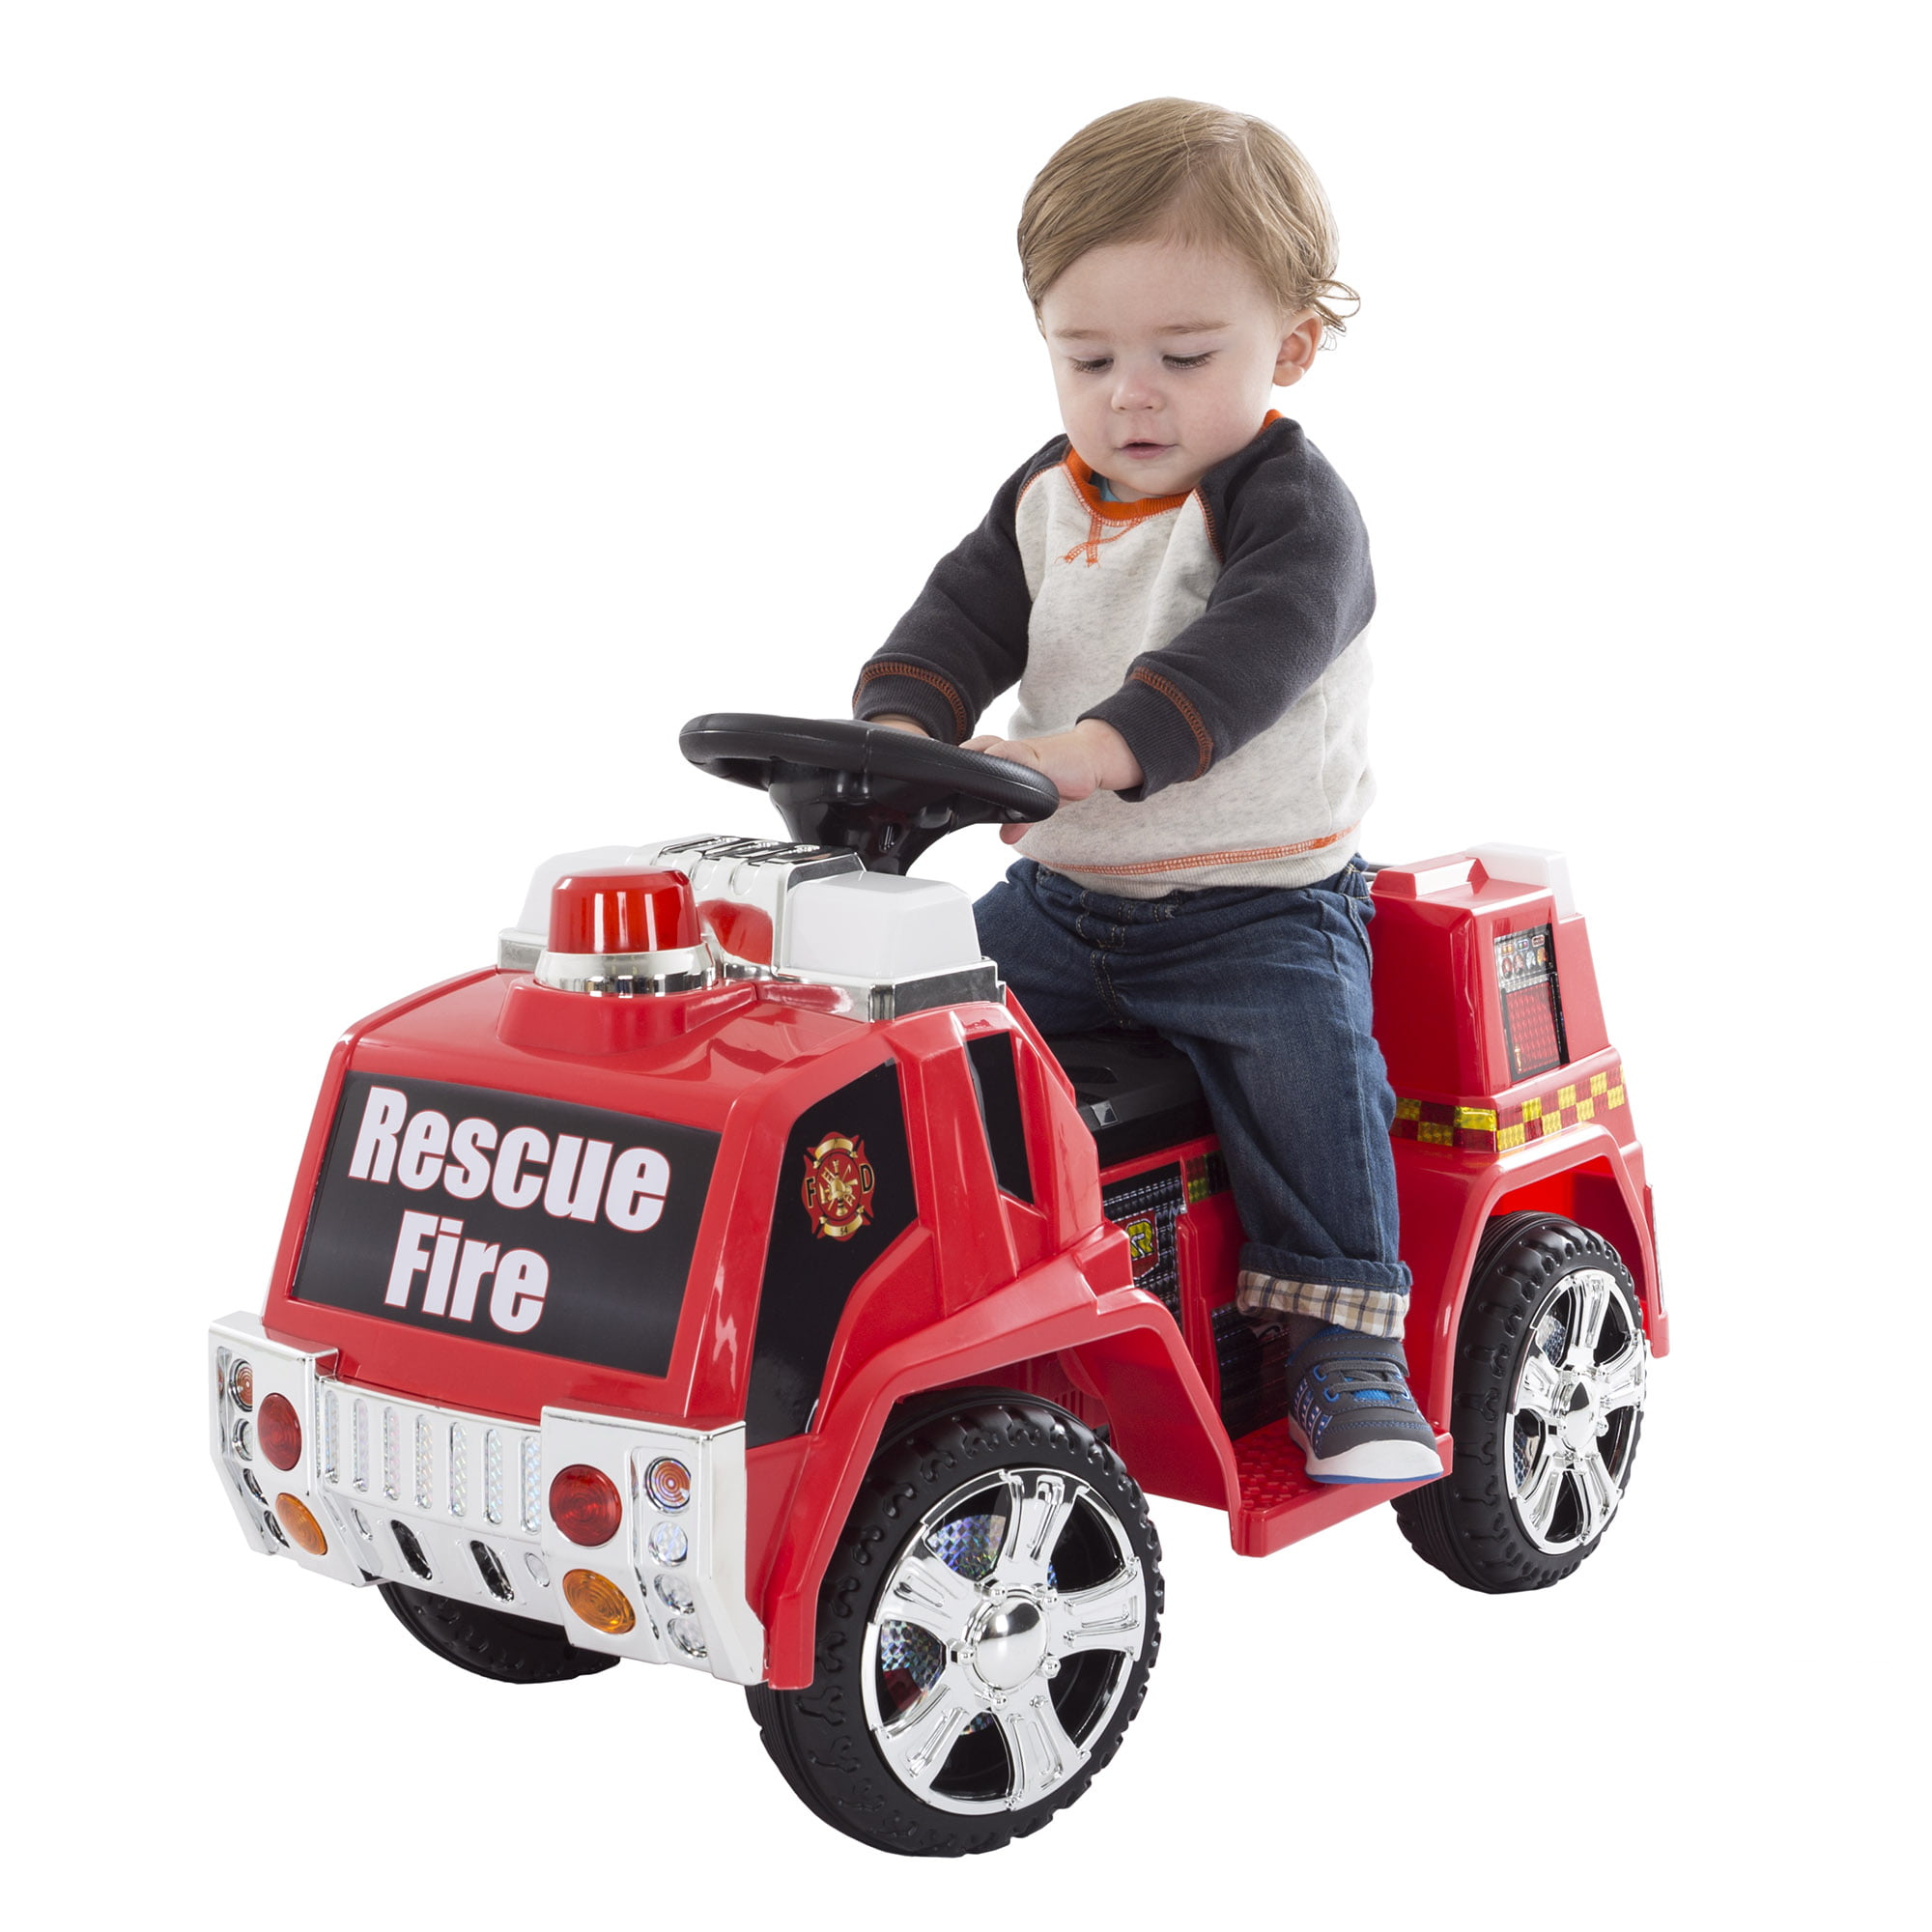 T... Ride on Toy Fire Truck for Kids Battery Powered Ride on Toy by Lil' Rider 